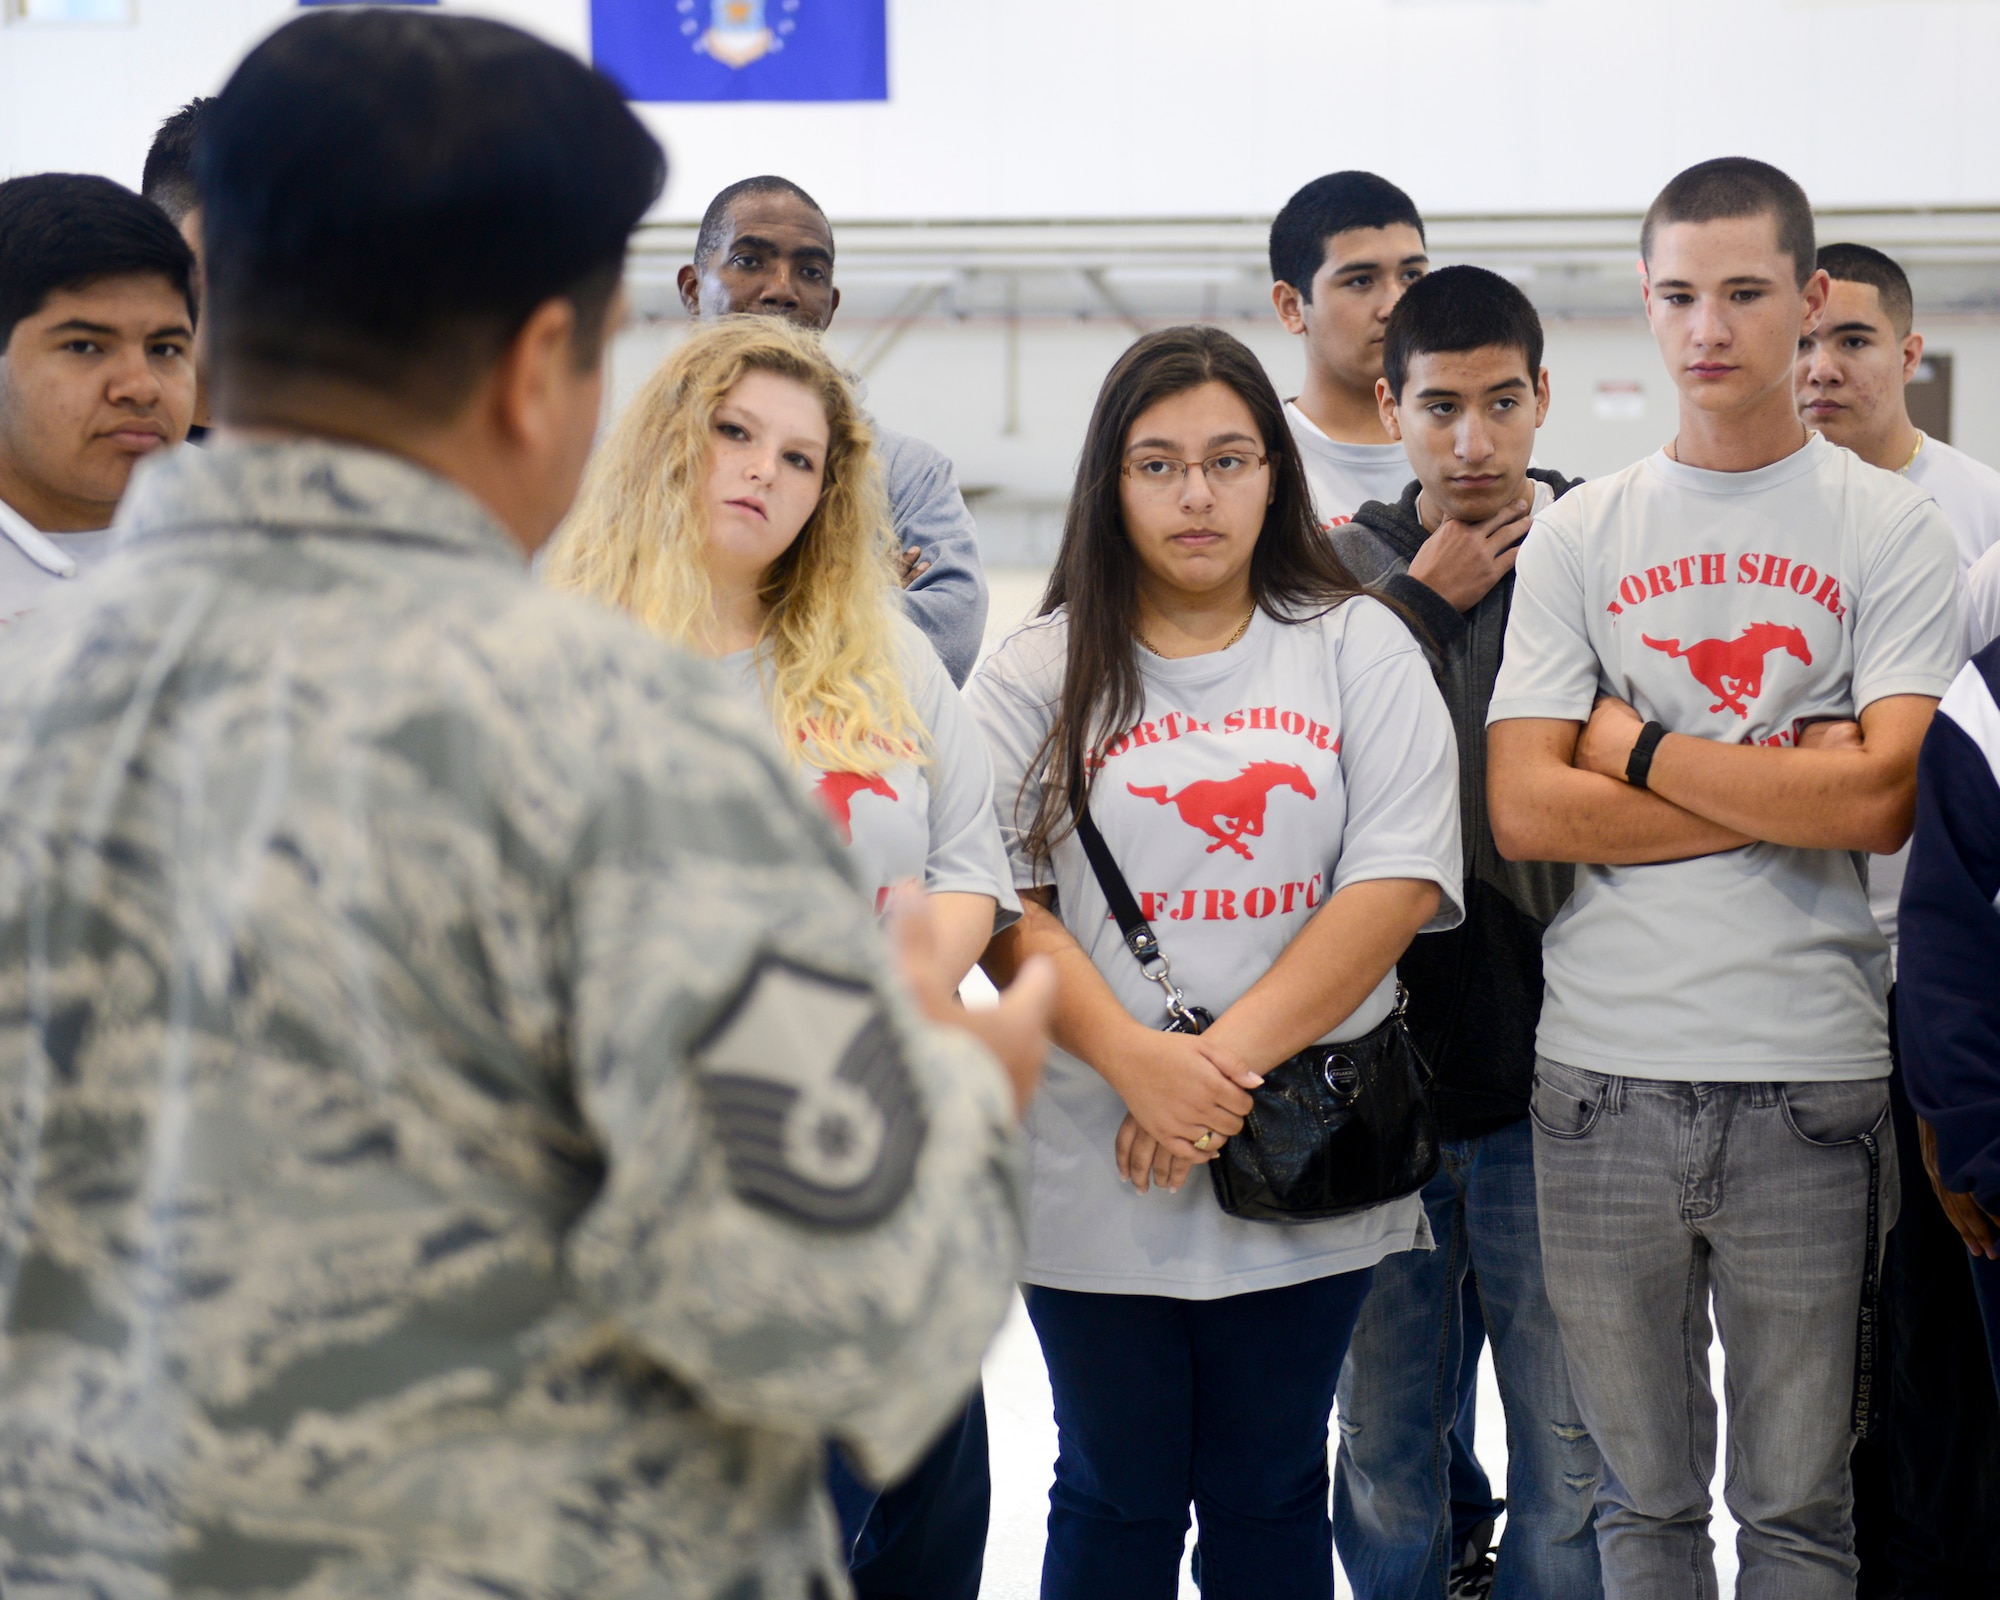 North Shore High School Air Force Junior Reserve Officer Training Corps cadets toured the 147th Reconnaissance Wing at Ellington Field in Houston November 7, 2015. The cadets stopped at the Air Support Operations Squadron to speak with Tactical Air Control Party members and Joint Terminal Attack Controllers about their job as well as the wing's hangar to learn about the MQ-1 Predator.